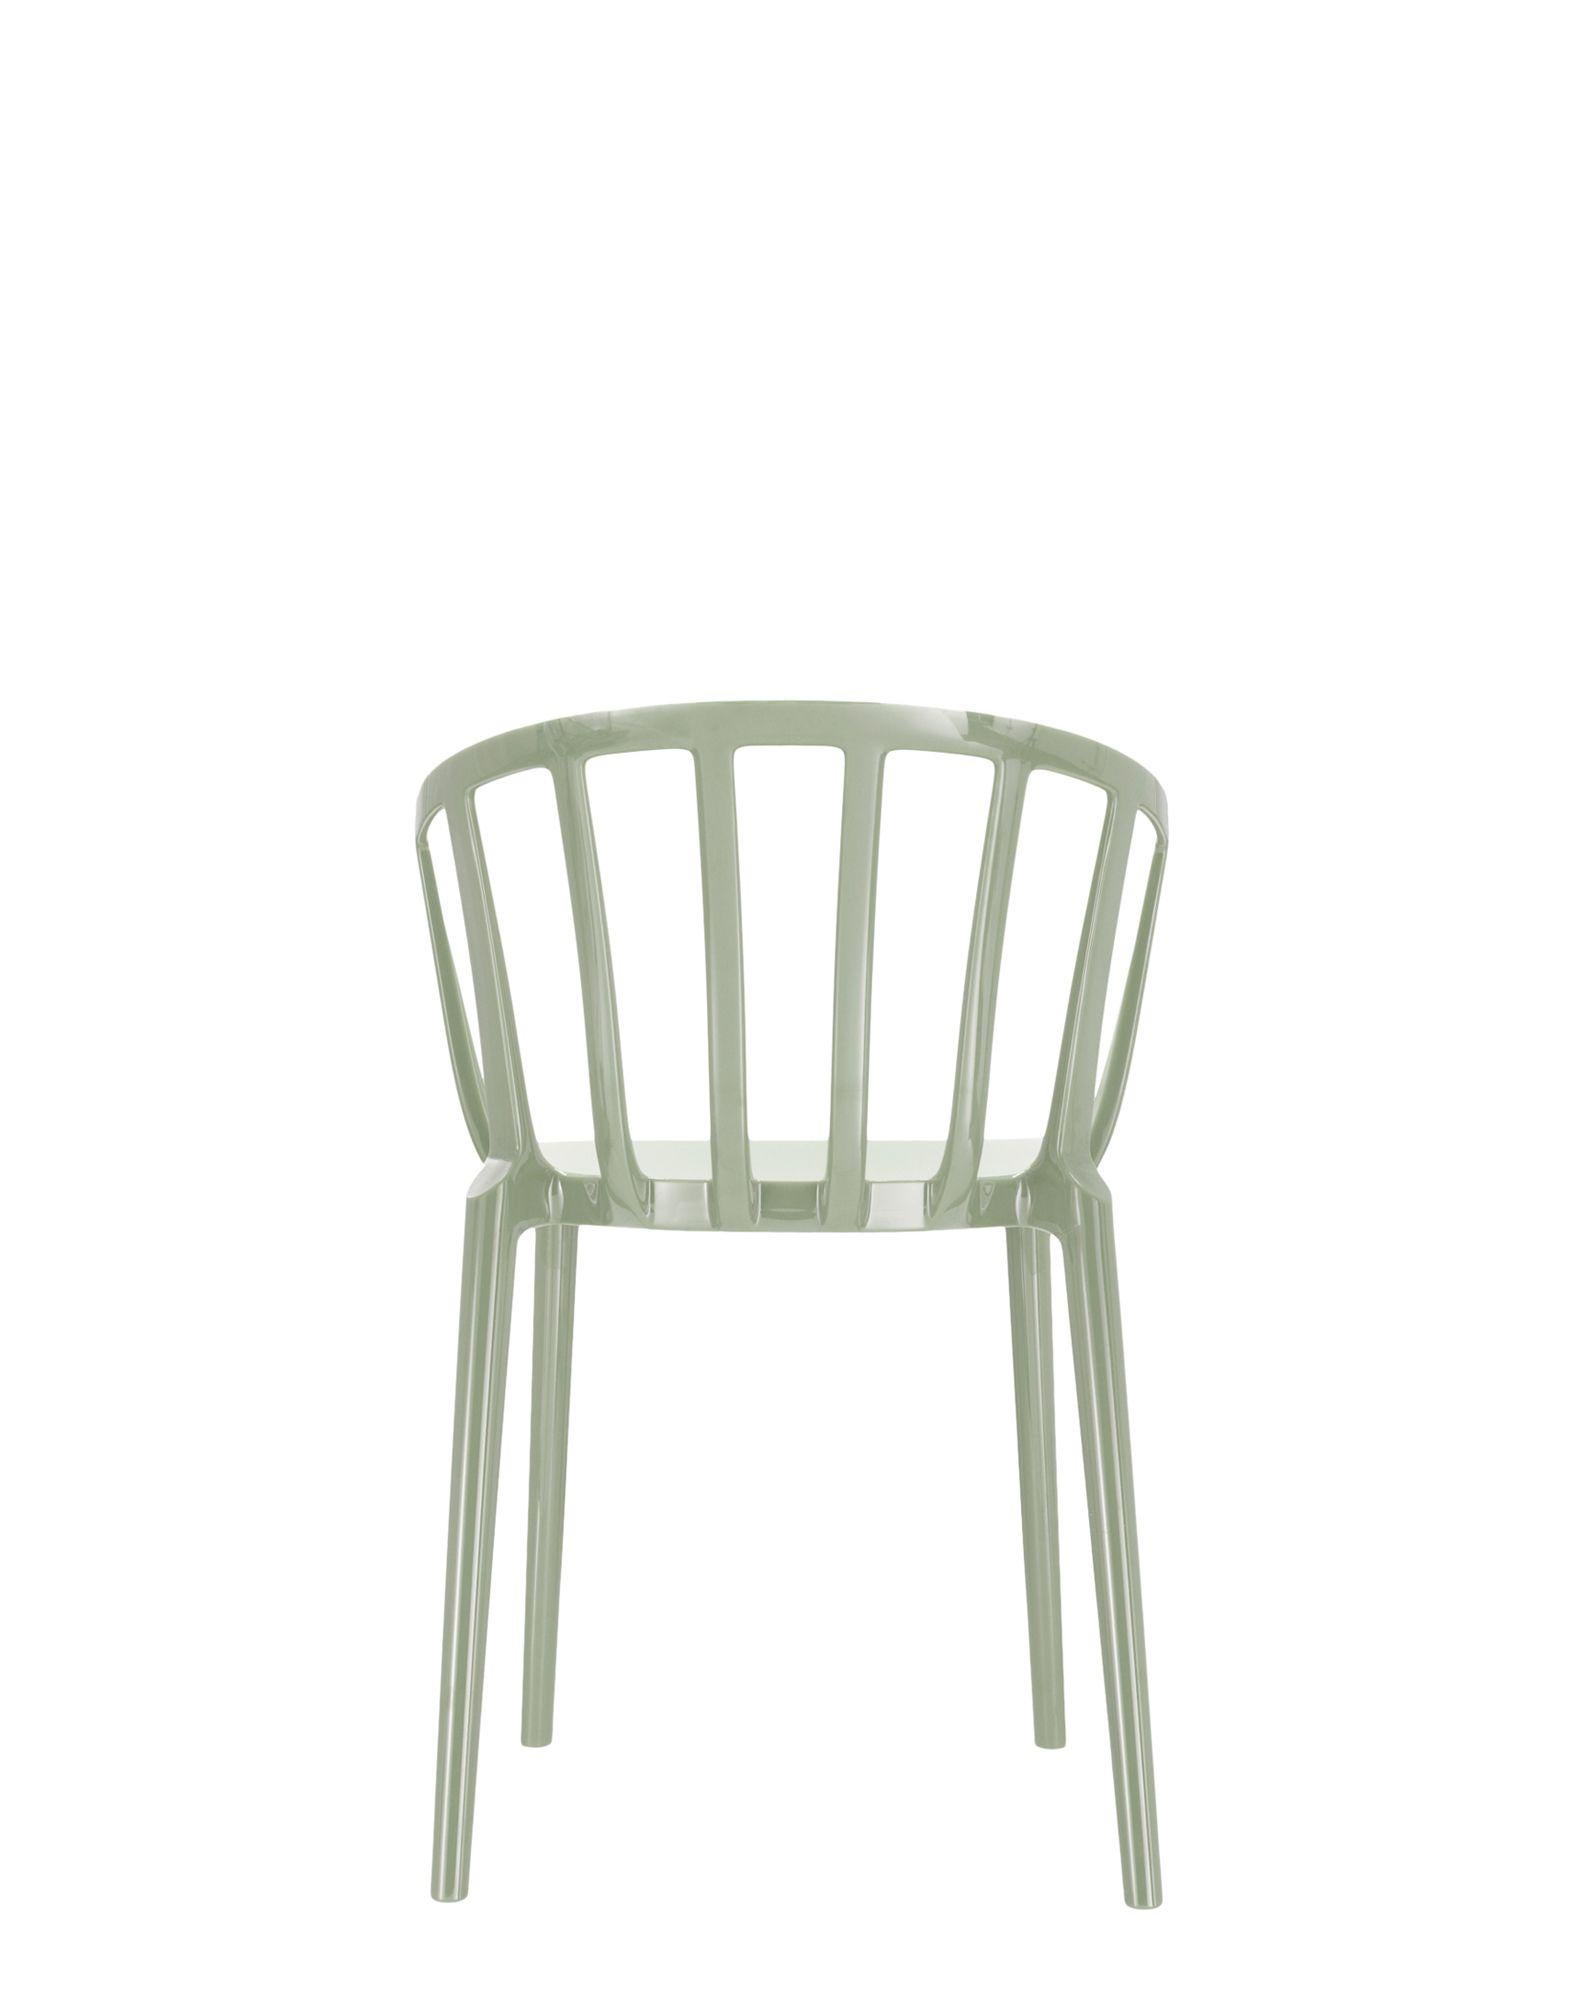 Italian Set of 2 Kartell Venice Chairs in Glossy Sage Green by Philippe Starck For Sale